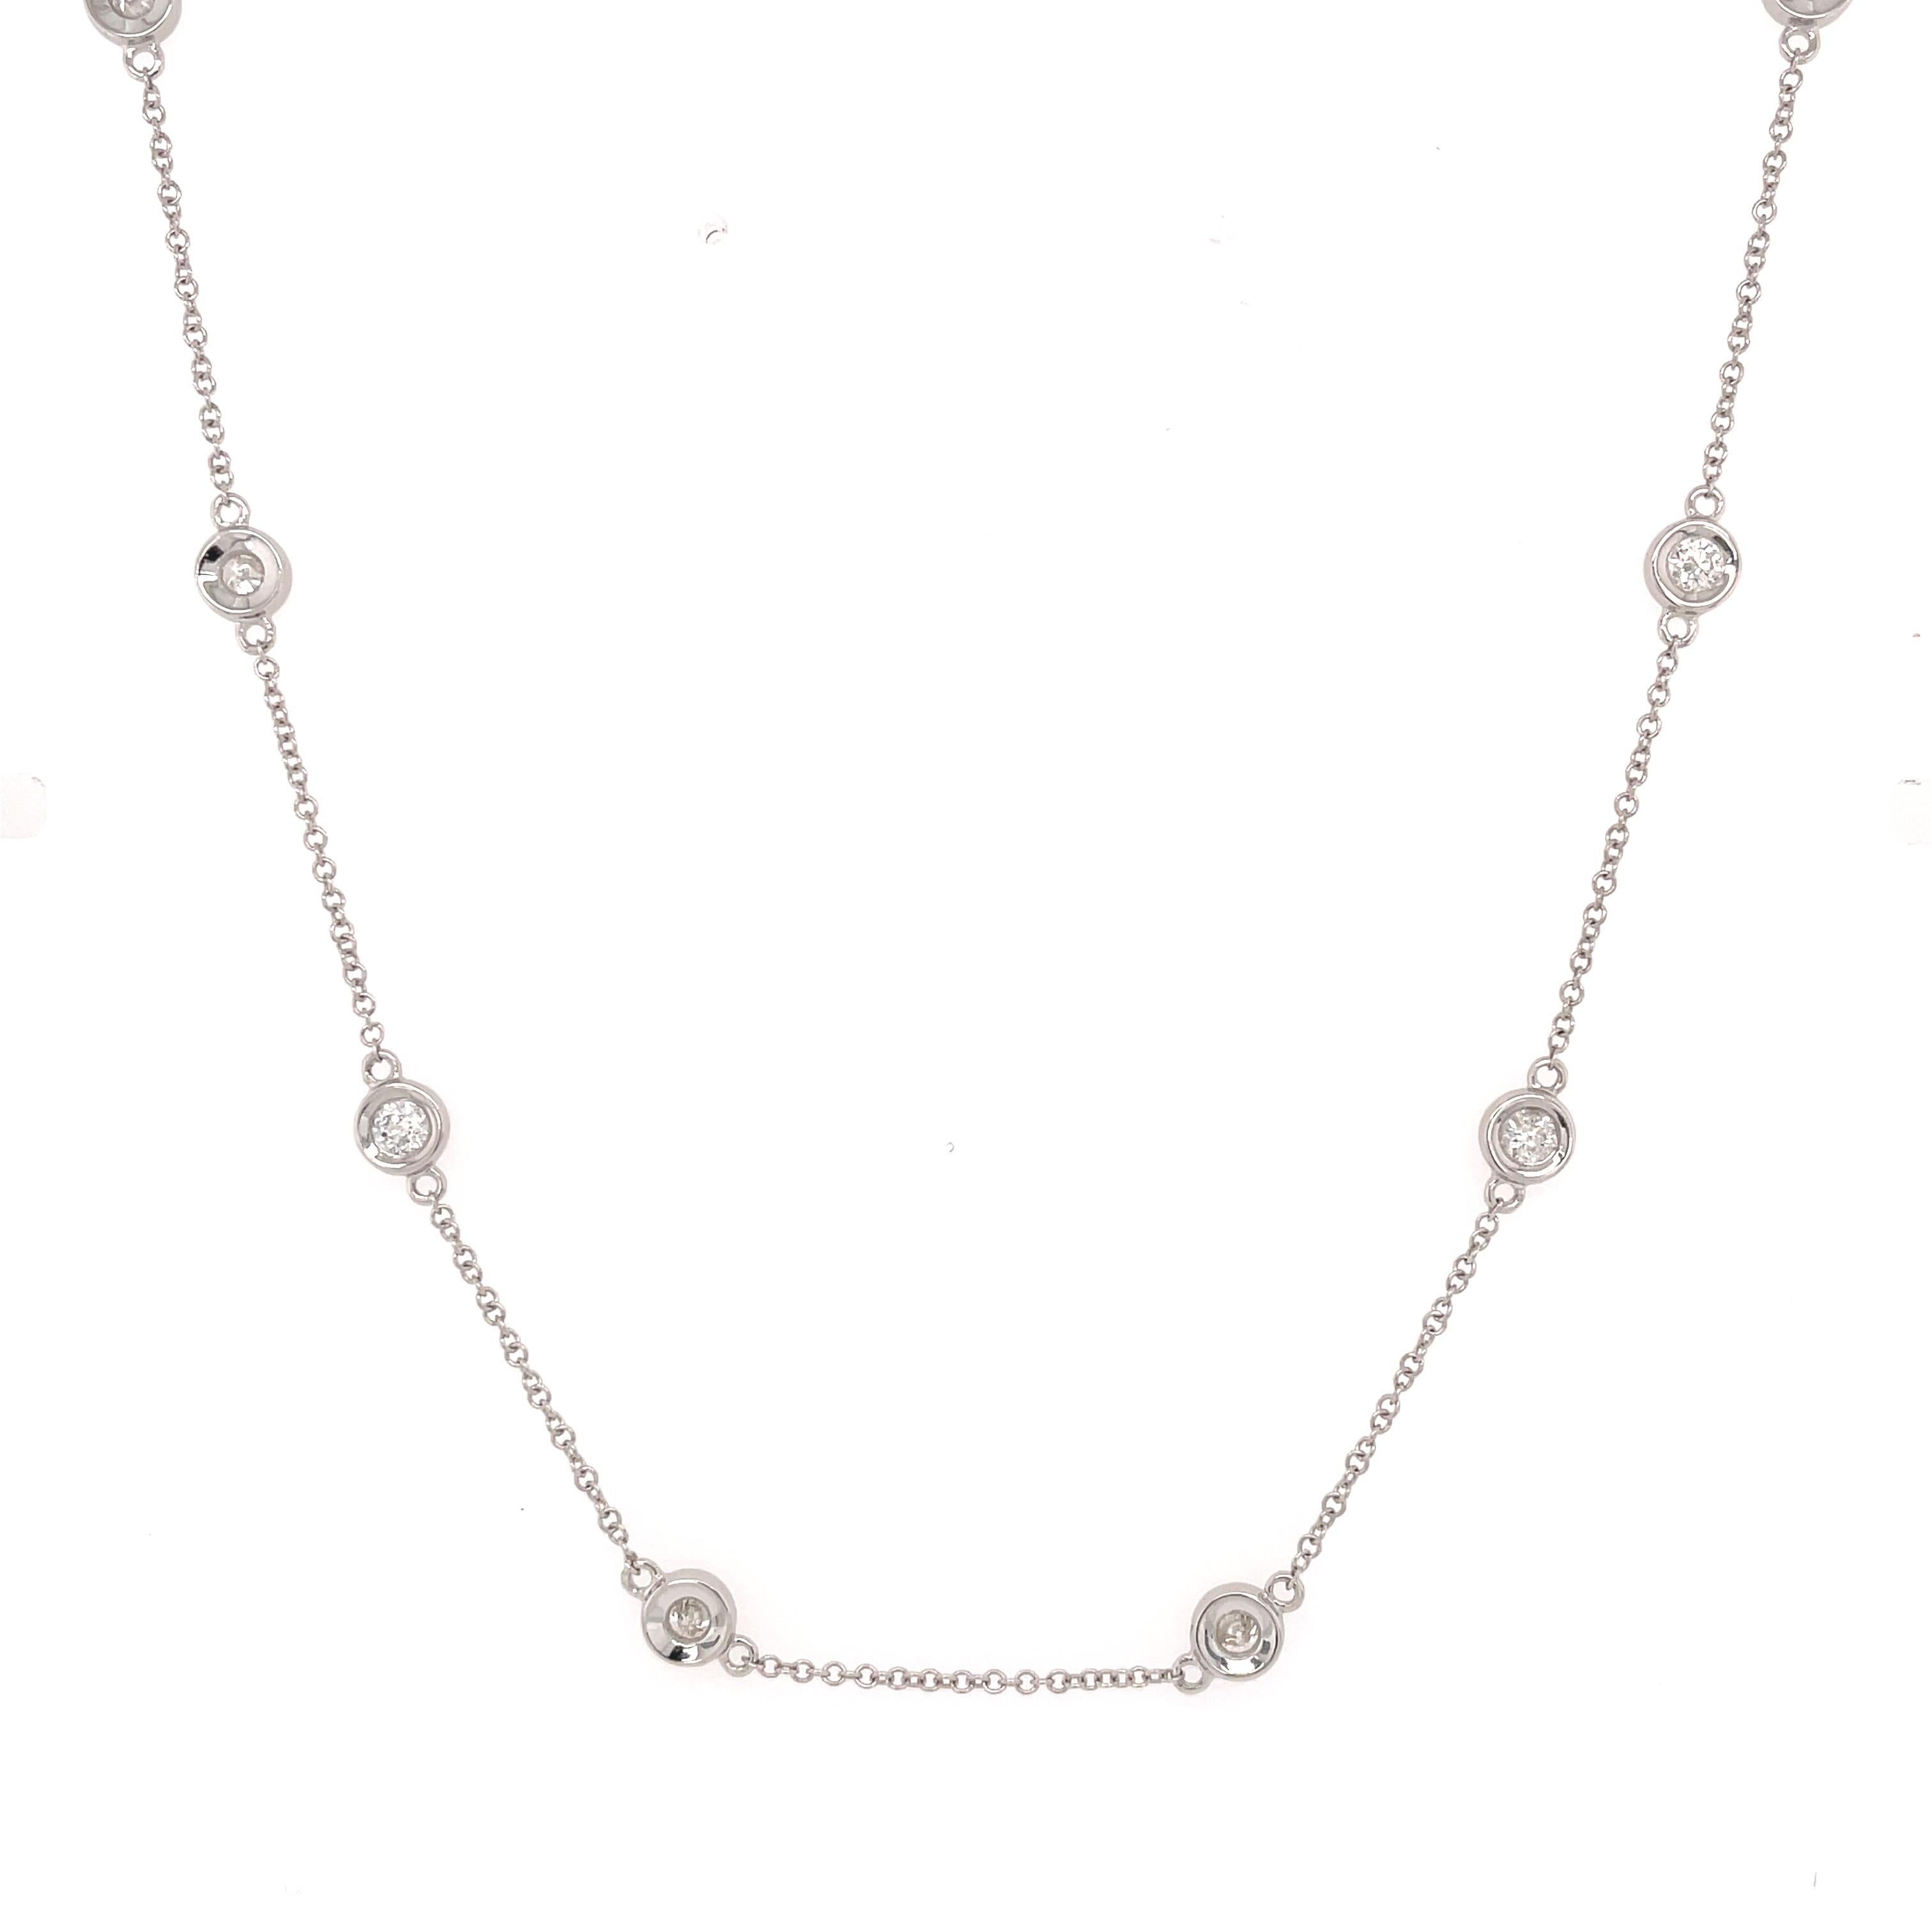 Beautiful and delicate this precious diamond by the yard necklace will leave everyone speechless the moment they see it. Crafted in high polished solid 14k white gold this necklace is set with 10 brilliant round cut diamonds of G-H color and clean